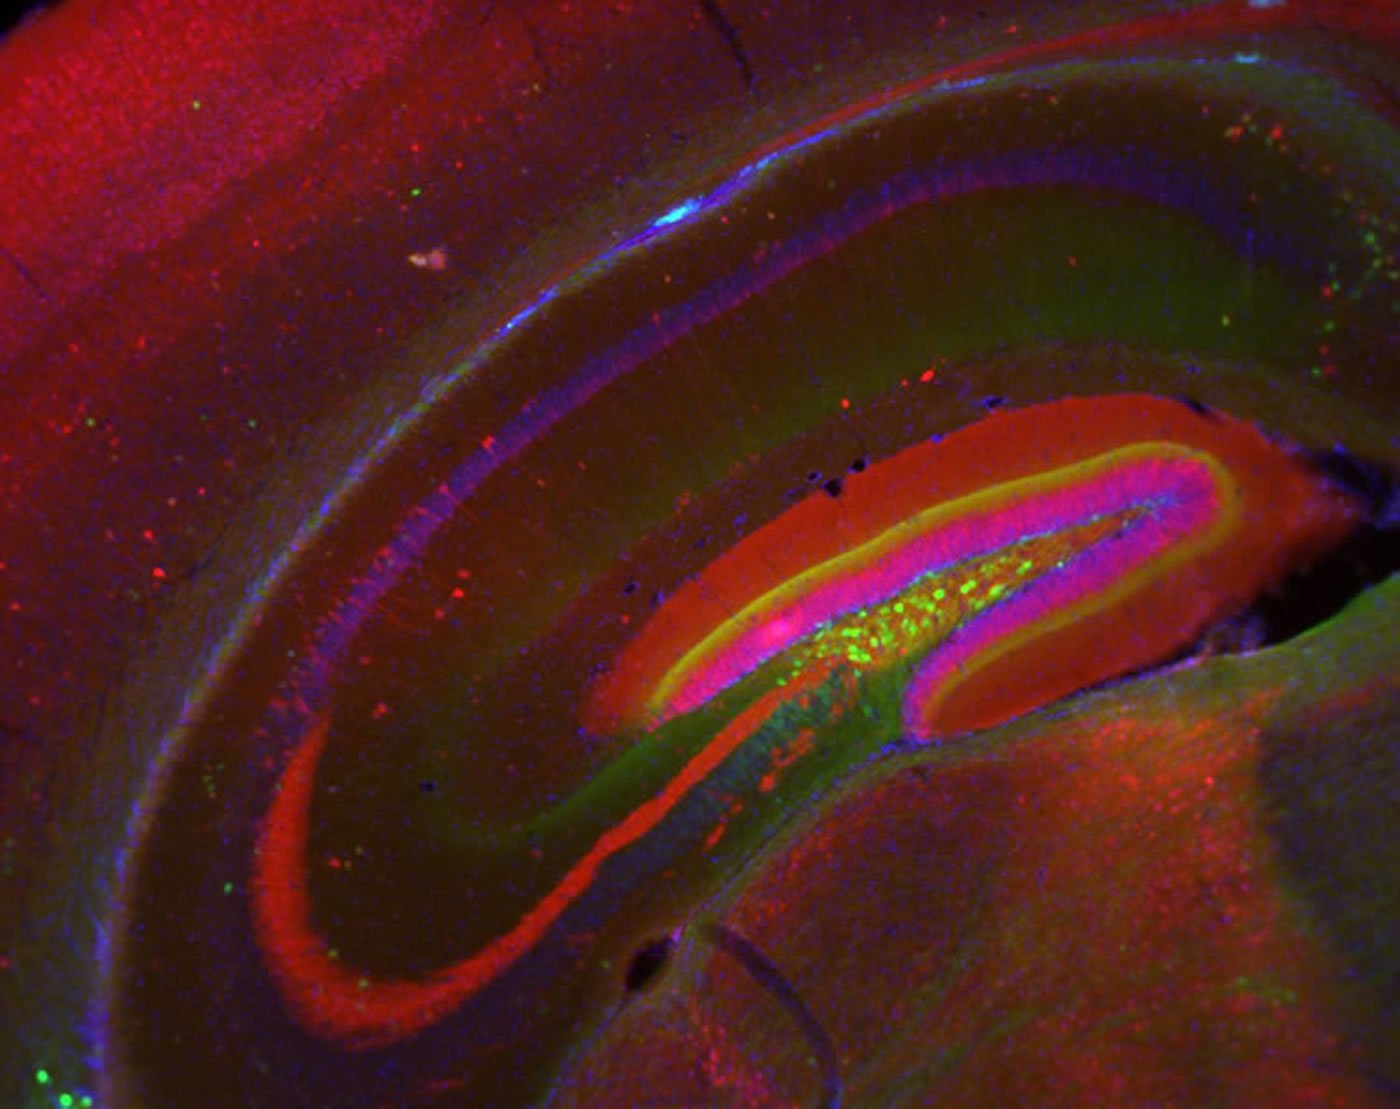 Image shows mouse hippocampus.